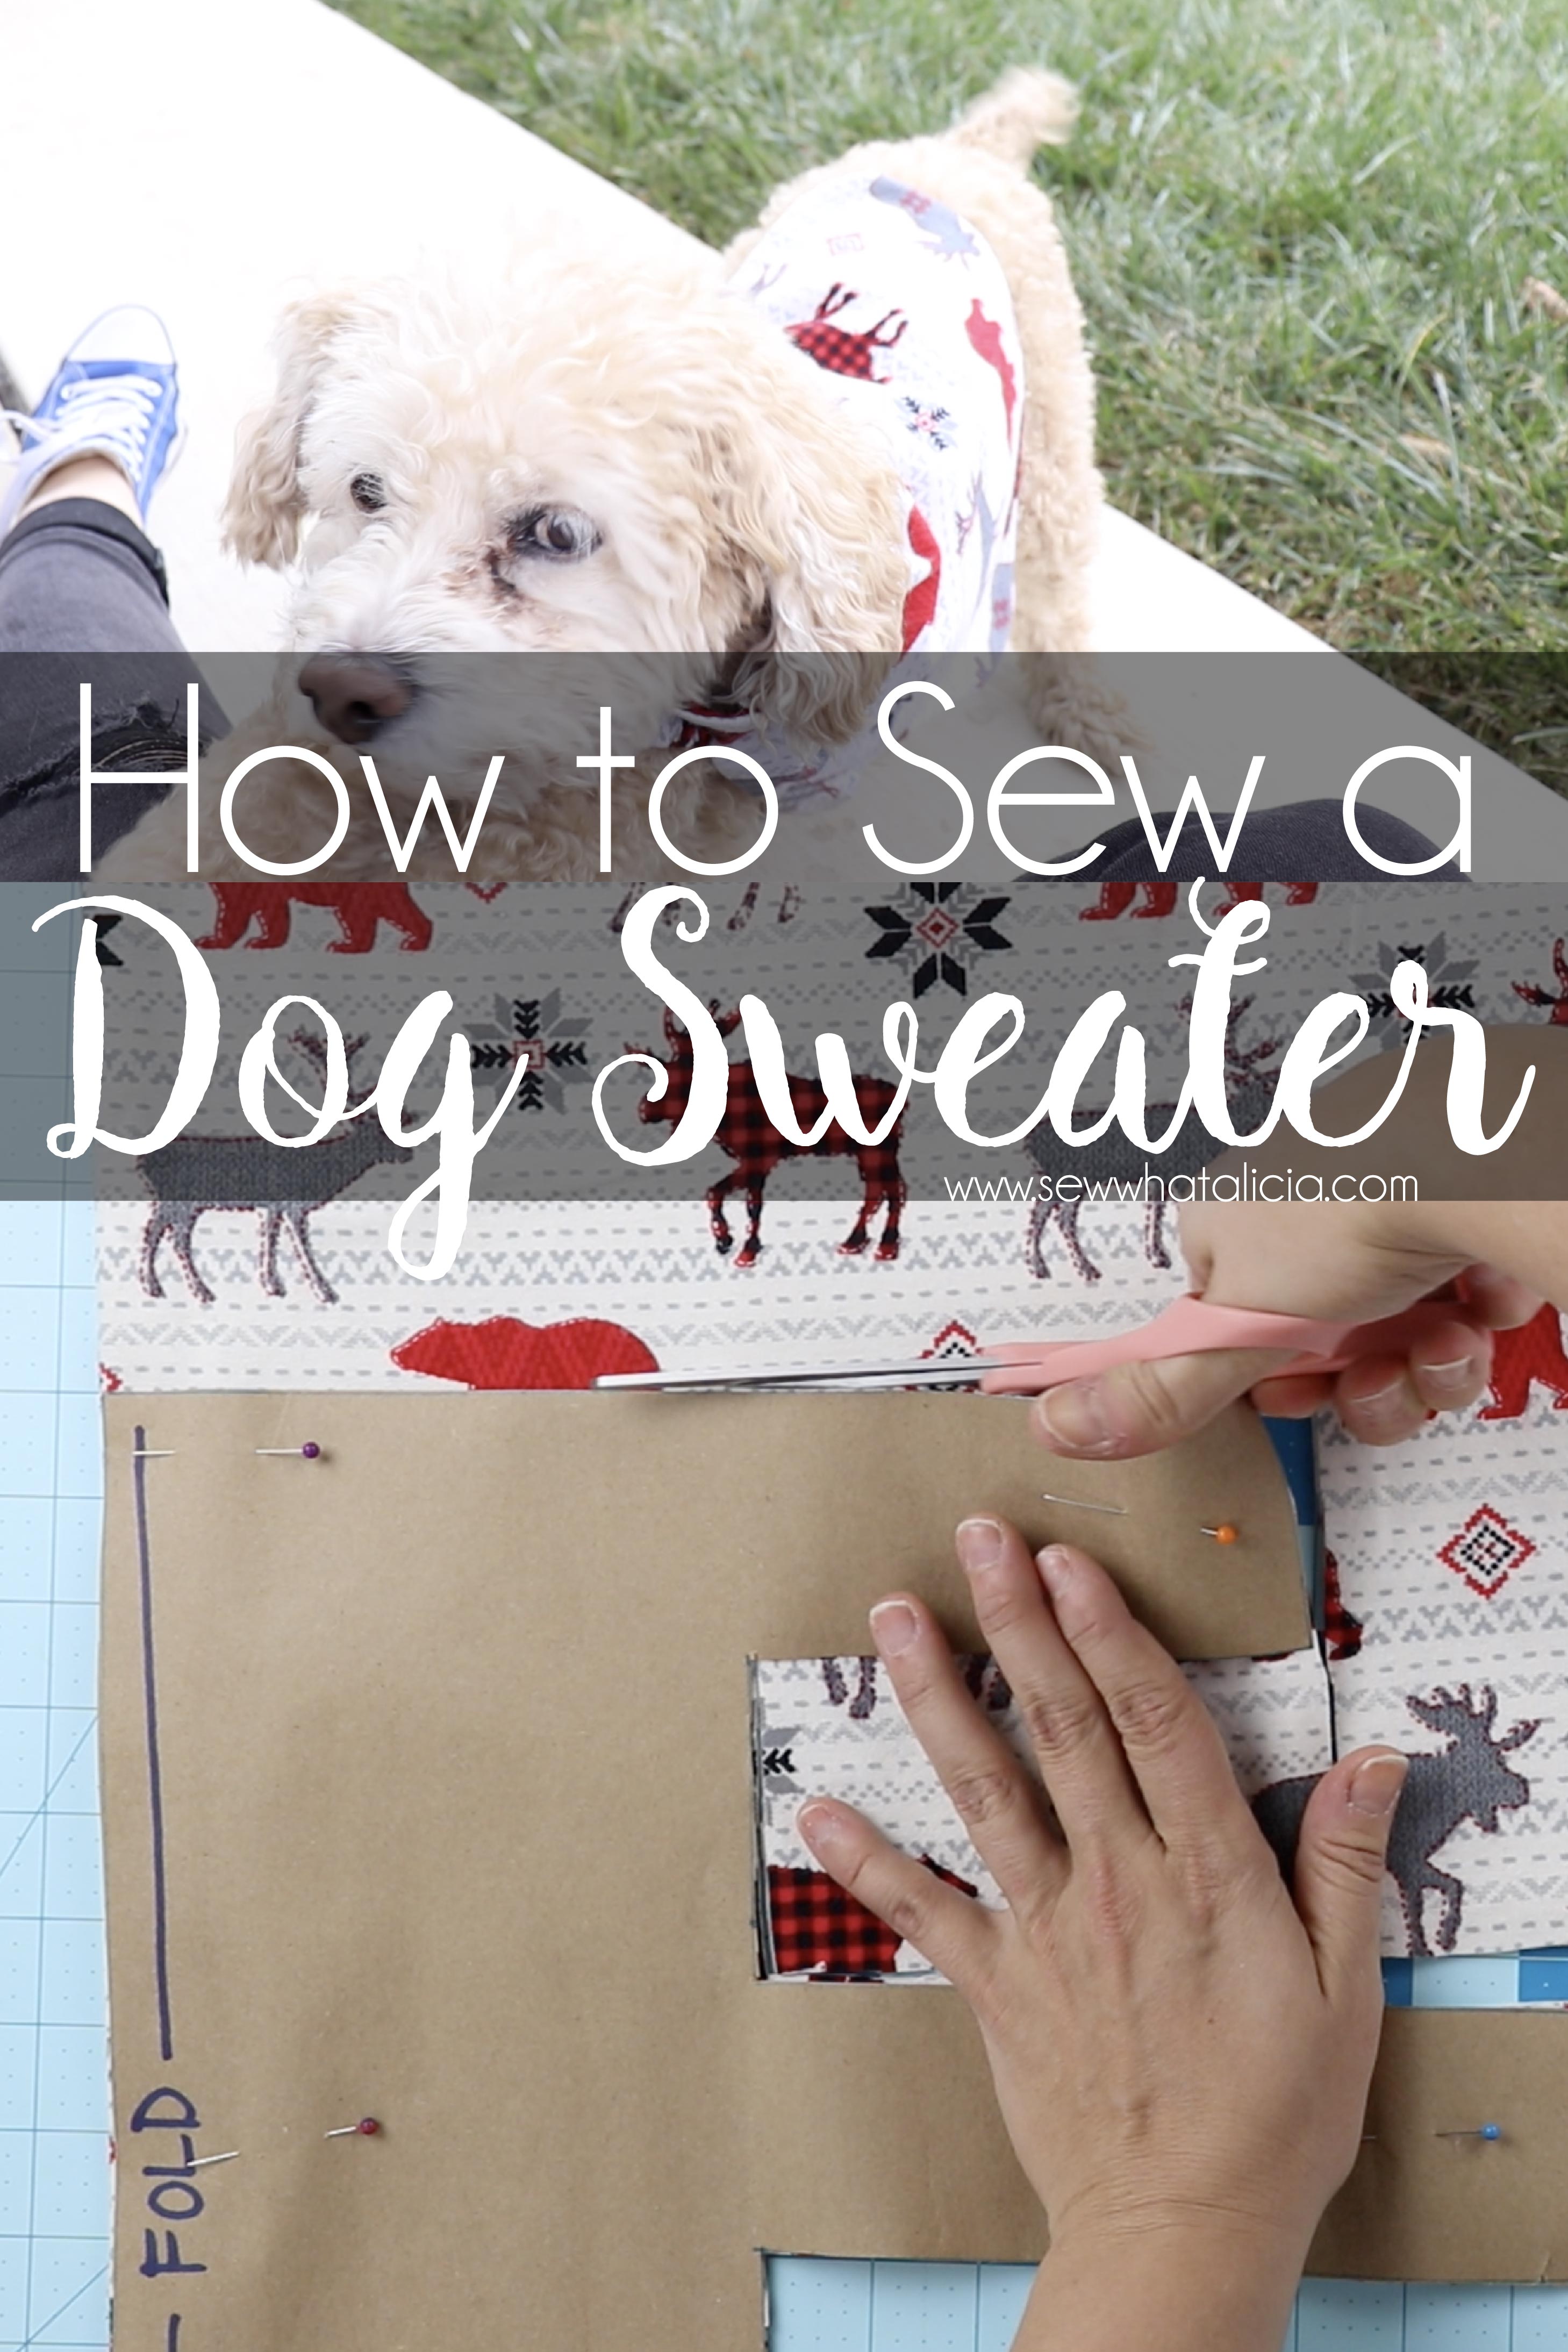 How to Make Dog Sweaters: If you have always wanted to know how to make a dog sweater/jacket then this post is for you. Walk through drafting a pattern and sewing the jacket. Click through for a full video and written tutorial. | www.sewwhatalicia.com